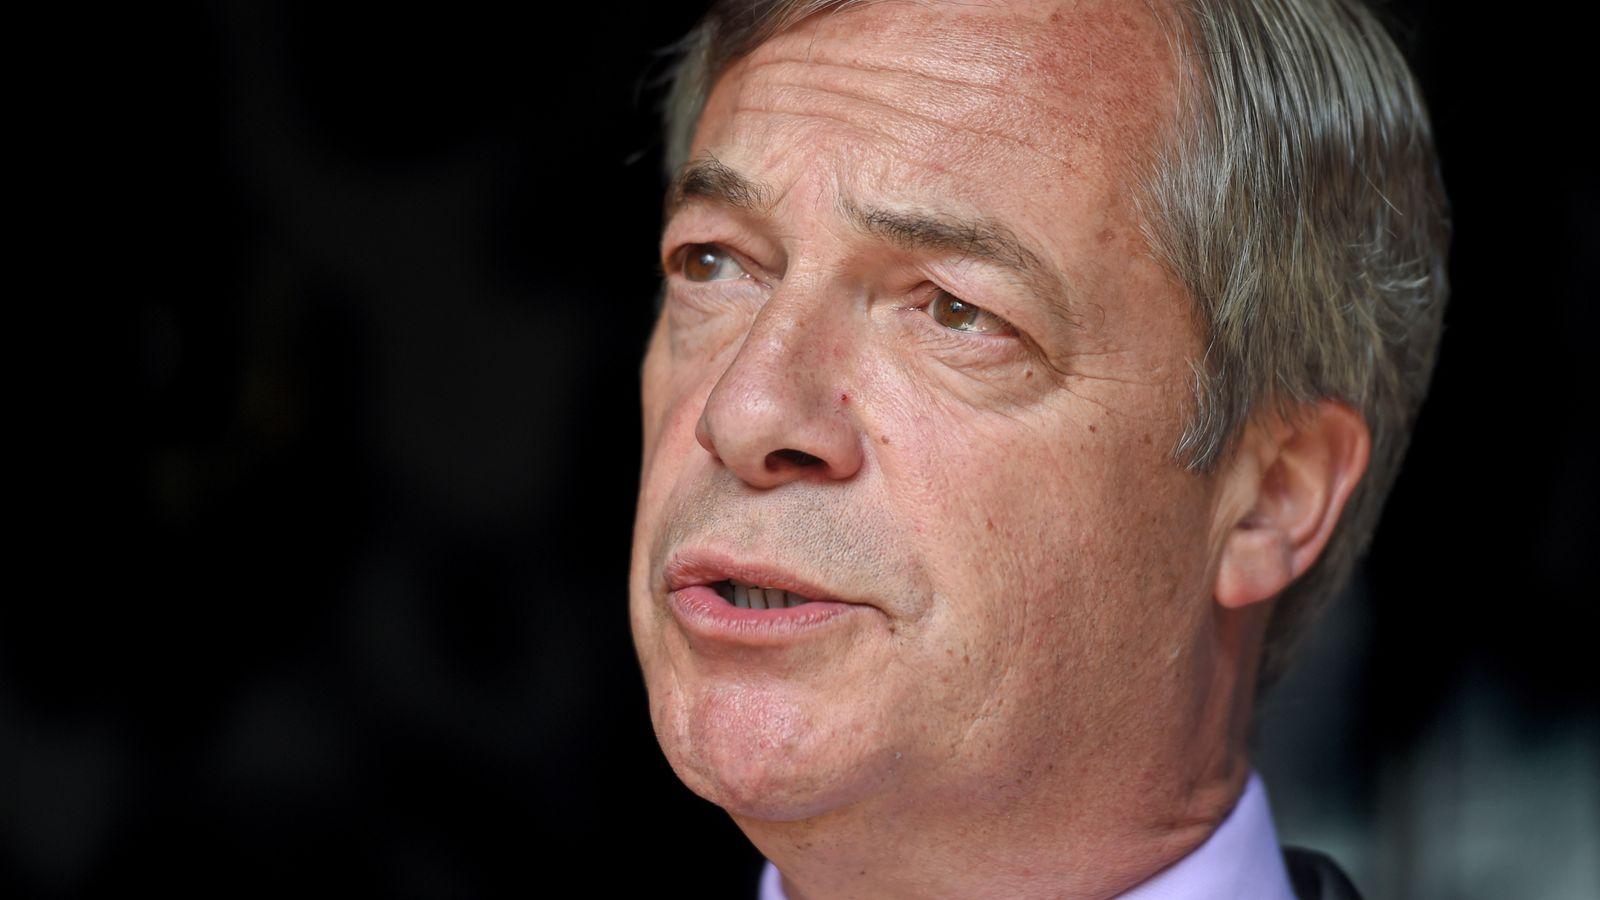 Nigel Farage claims his bank accounts have been closed 'without explanation'